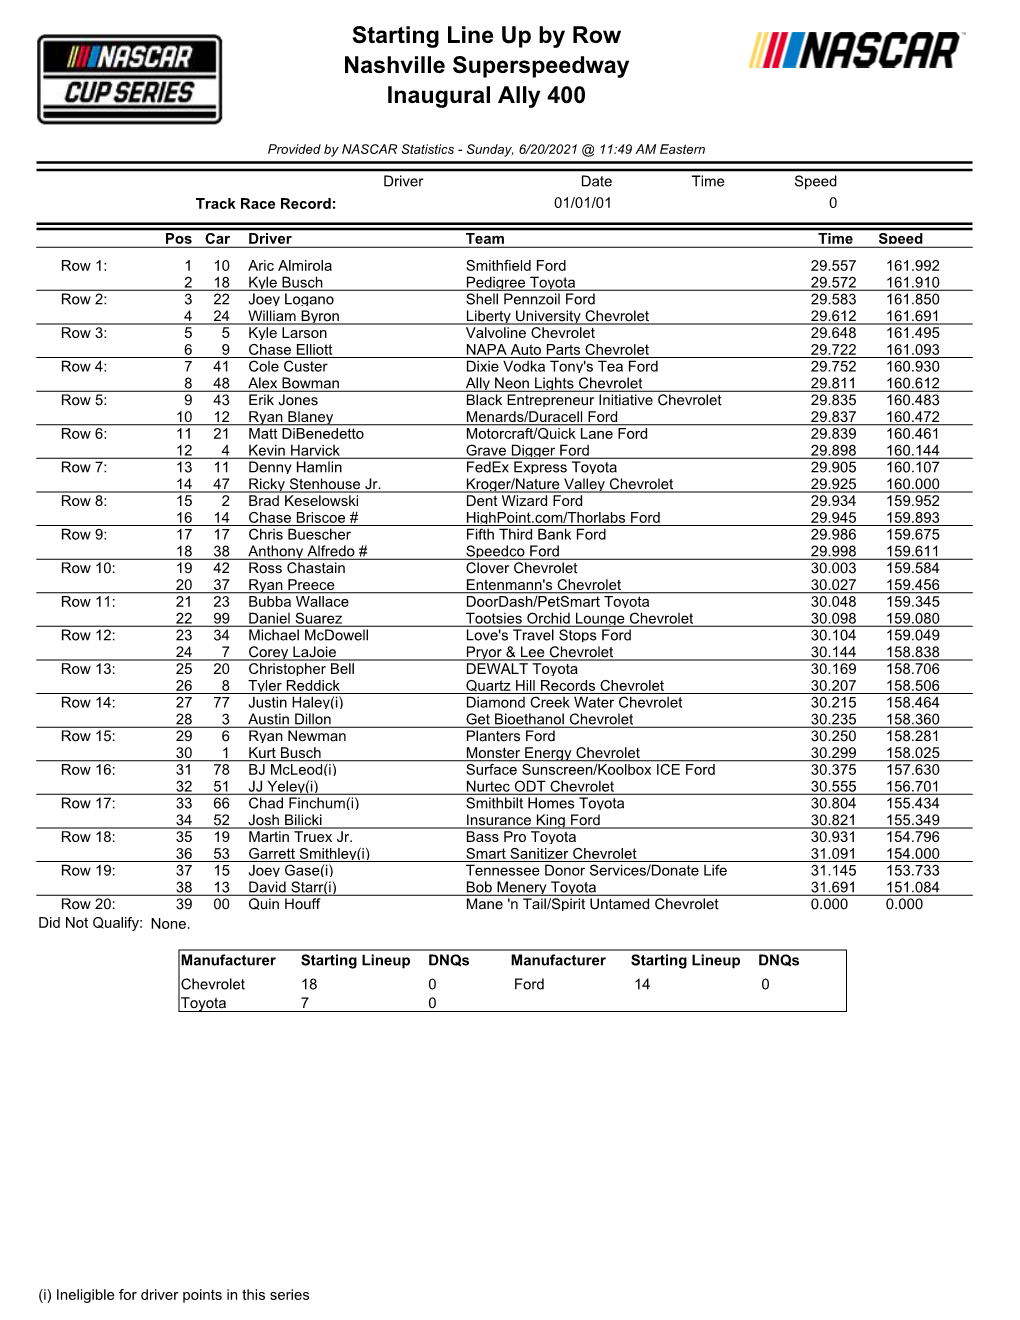 Starting Line up by Row Nashville Superspeedway Inaugural Ally 400